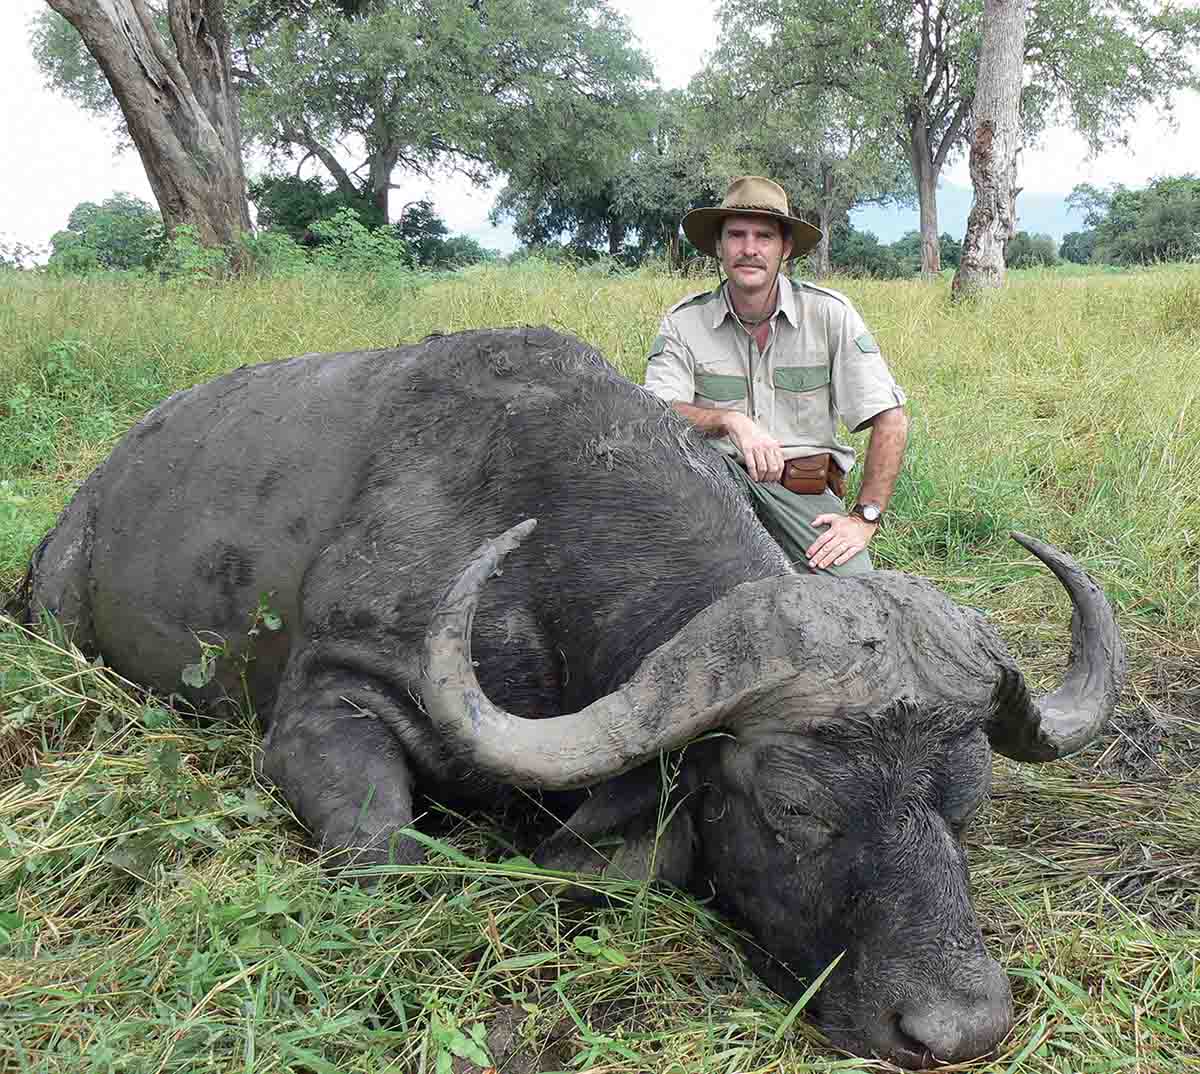 Buffalo taken in open country need accurate shot placement, not “stopping power.”